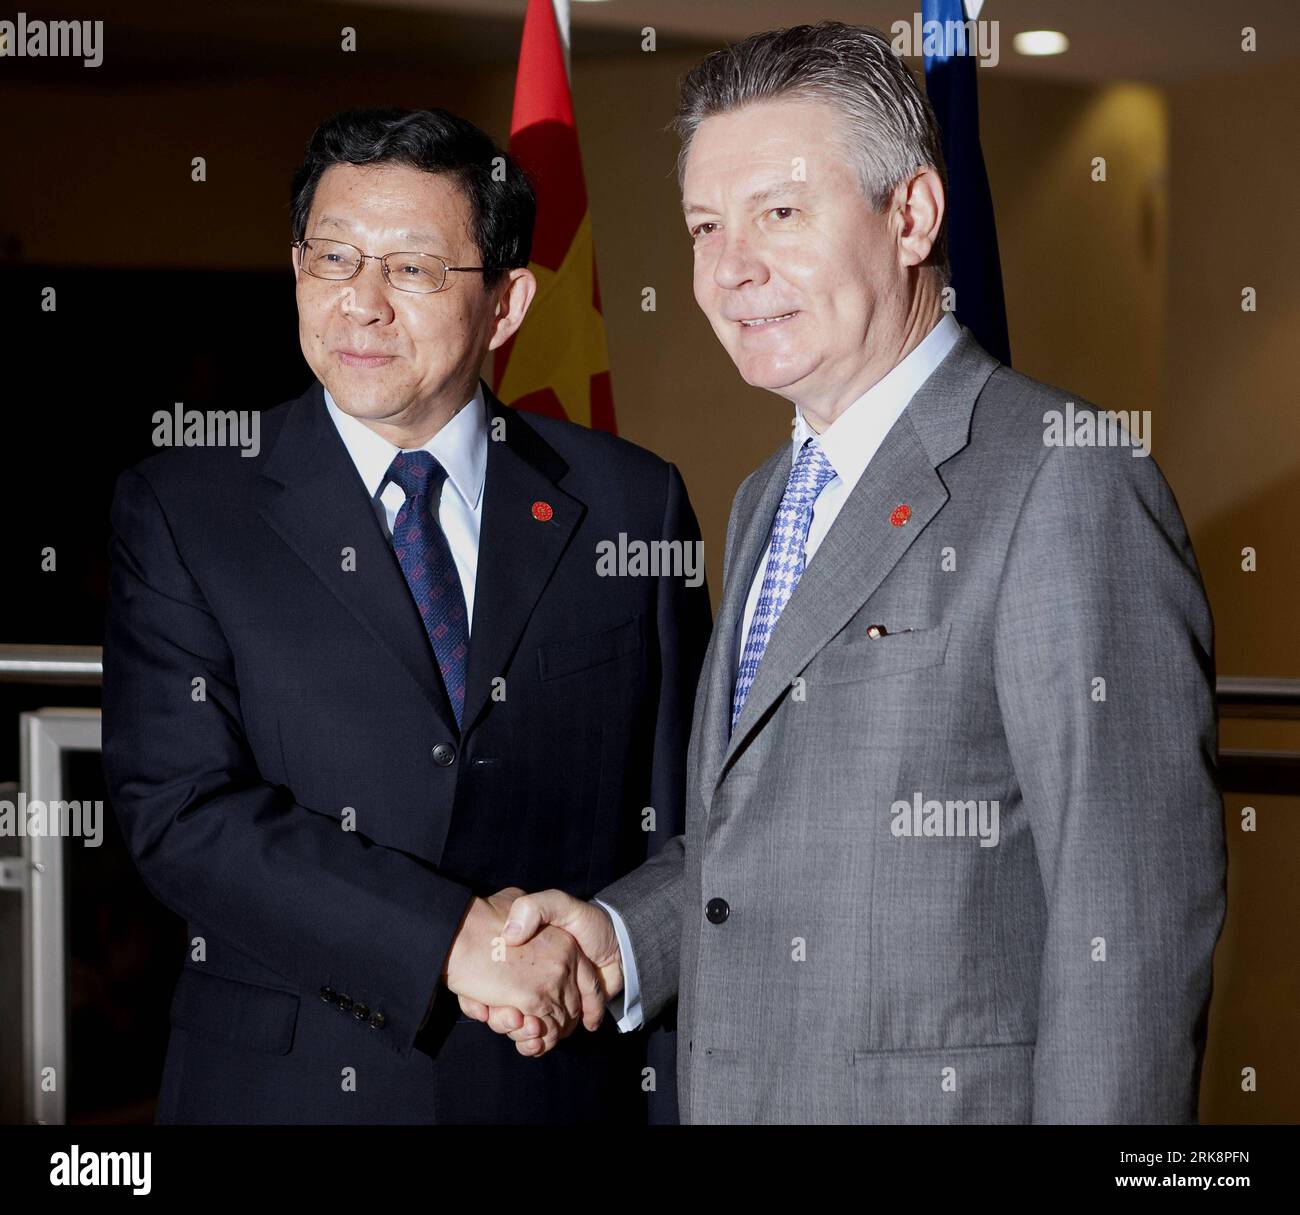 Bildnummer: 54066810  Datum: 21.05.2010  Copyright: imago/Xinhua (100521) -- BRUSSELS, May 21, 2010 --The EU Commissioner for Trade Karel De Gucht(R) shakes hands with Chinese Minister of Commerce Chen Deming (L) prior to a bilateral meeting in the EU Commission headquarters in Brussels, capital of Belgium, May 21, 2010. (Xinhua/Thierry Monasse) (lyi) (1)EU-GUCHT-CHINA-CHEN DEMING-MEETING PUBLICATIONxNOTxINxCHN People Politik premiumd xint kbdig xkg 2010 quadrat     Bildnummer 54066810 Date 21 05 2010 Copyright Imago XINHUA  Brussels May 21 2010 The EU Commissioner for Trade Karel de Gucht r S Stock Photo